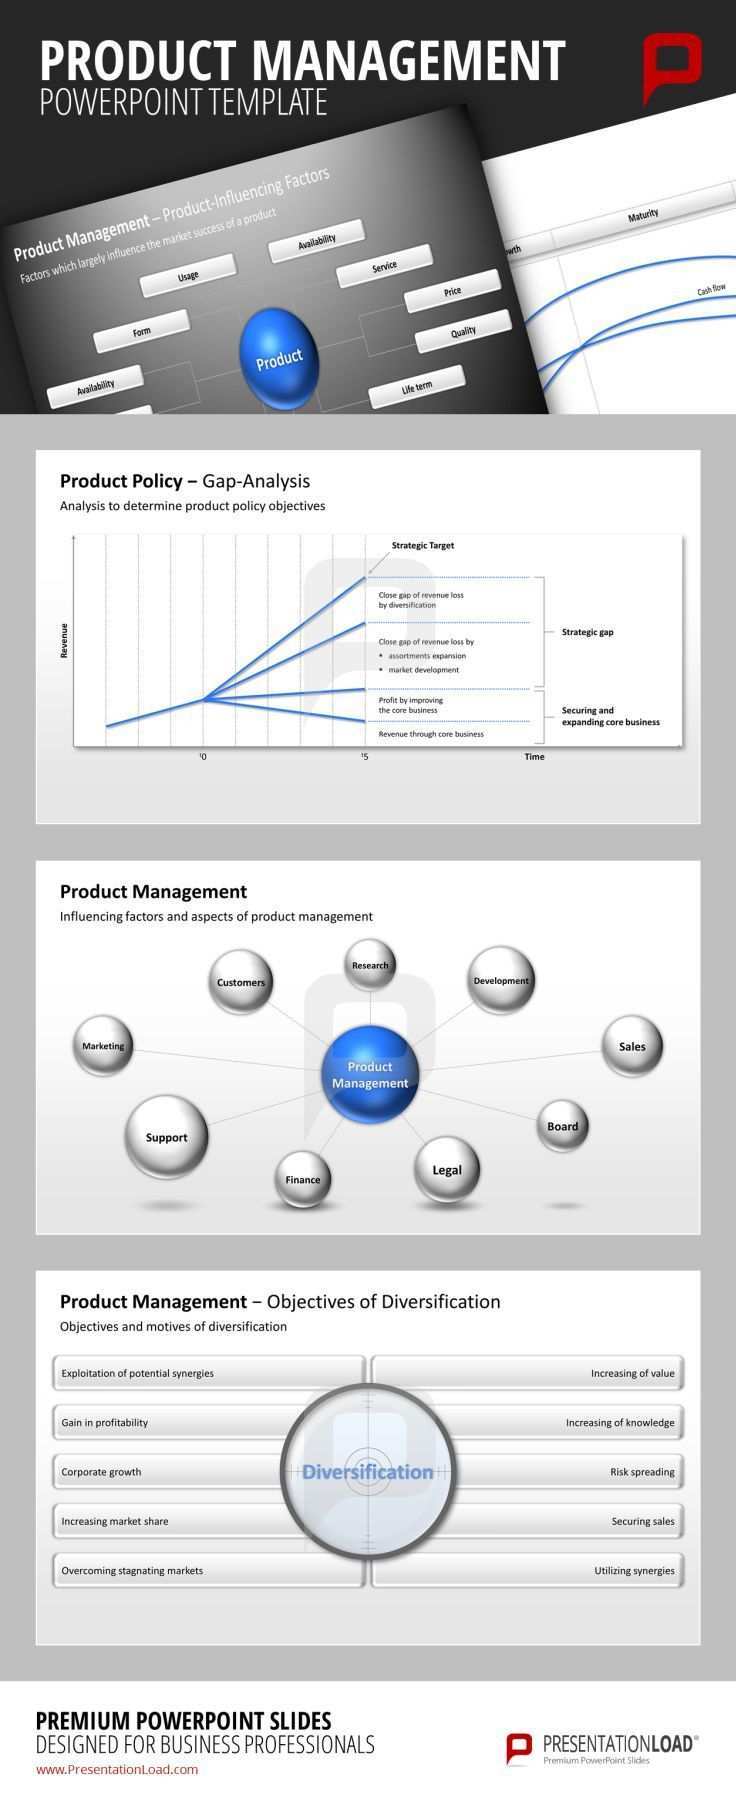 Product Management Powerpoint Template Influencing Factors And Aspects Of Product Management Researc Powerpoint Slide Designs Powerpoint Powerpoint Templates